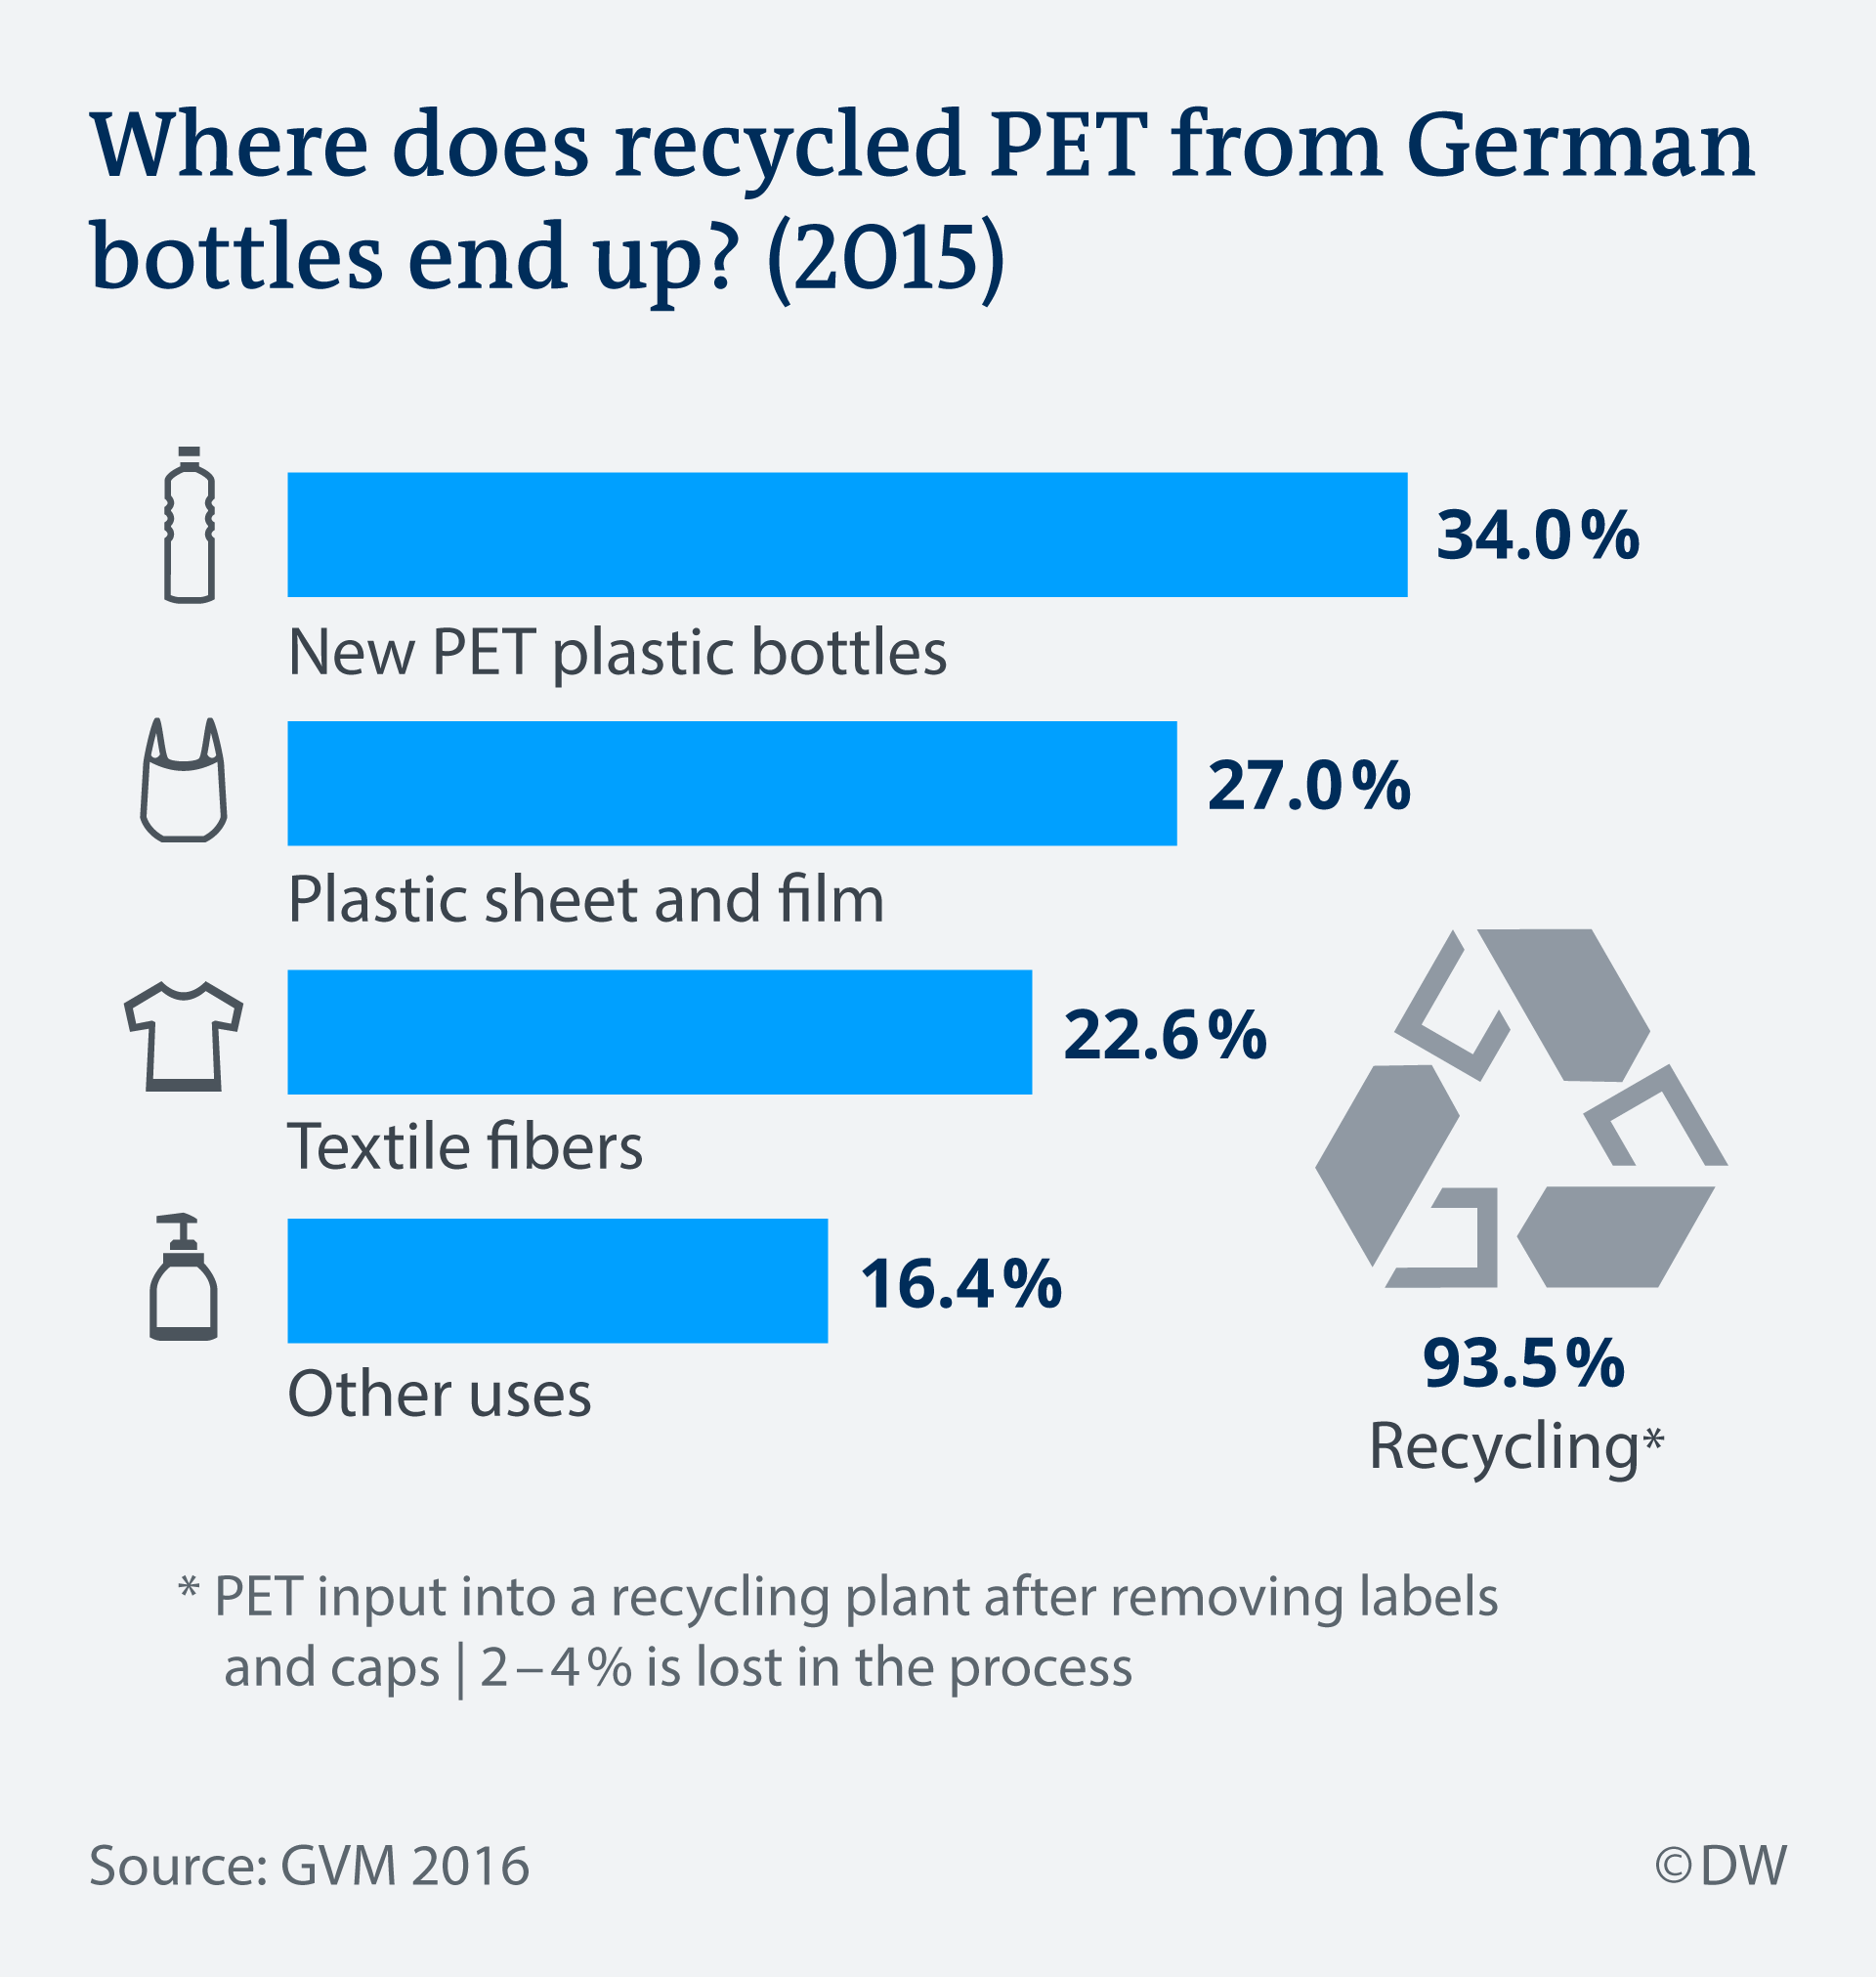 Where does recycled PET end up